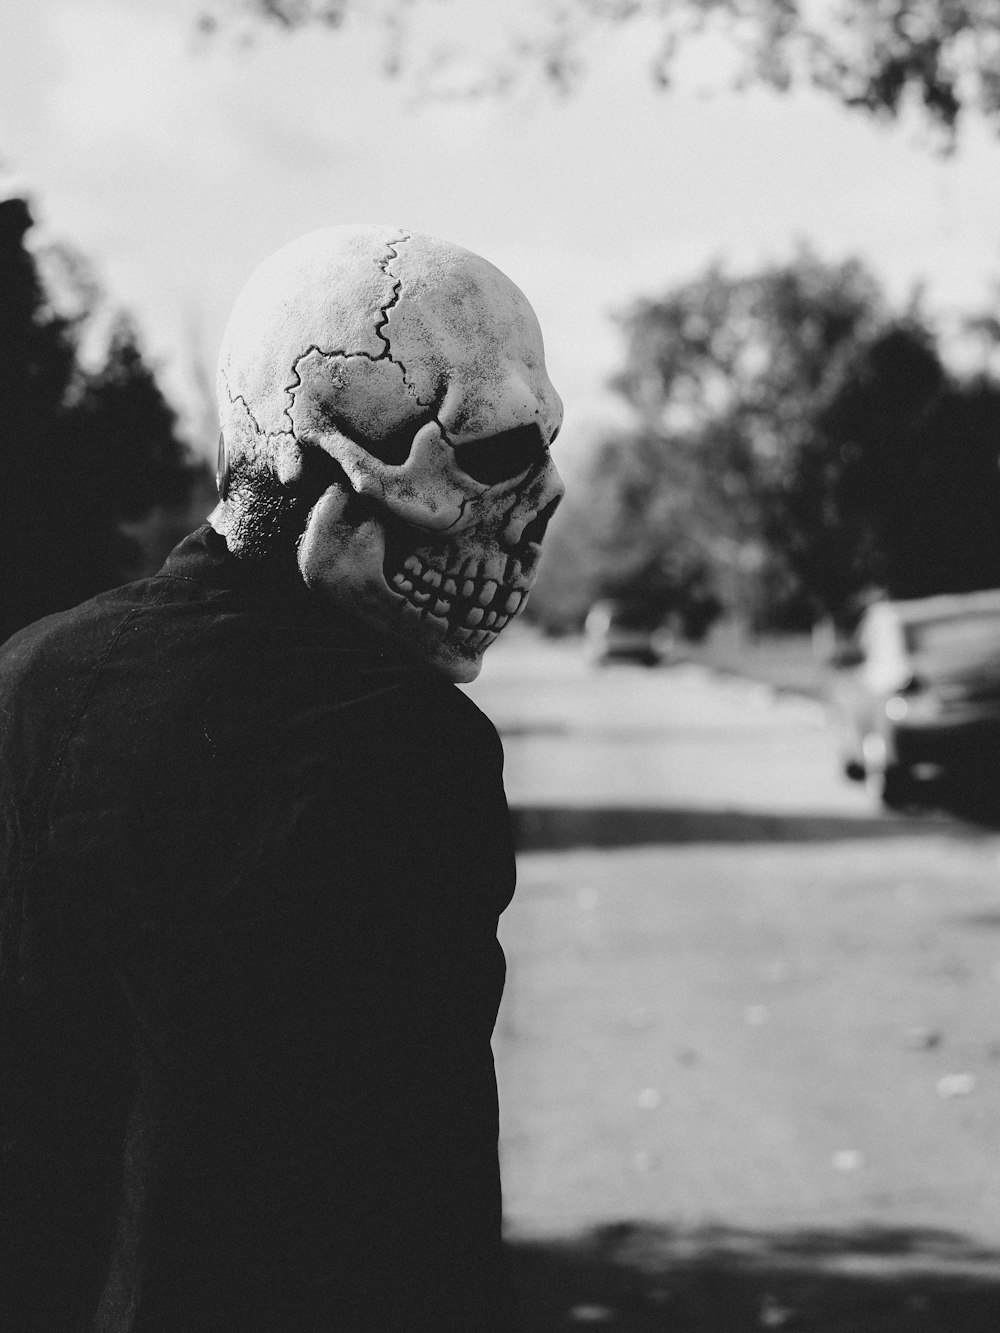 a man with a skull on his head walking down the street